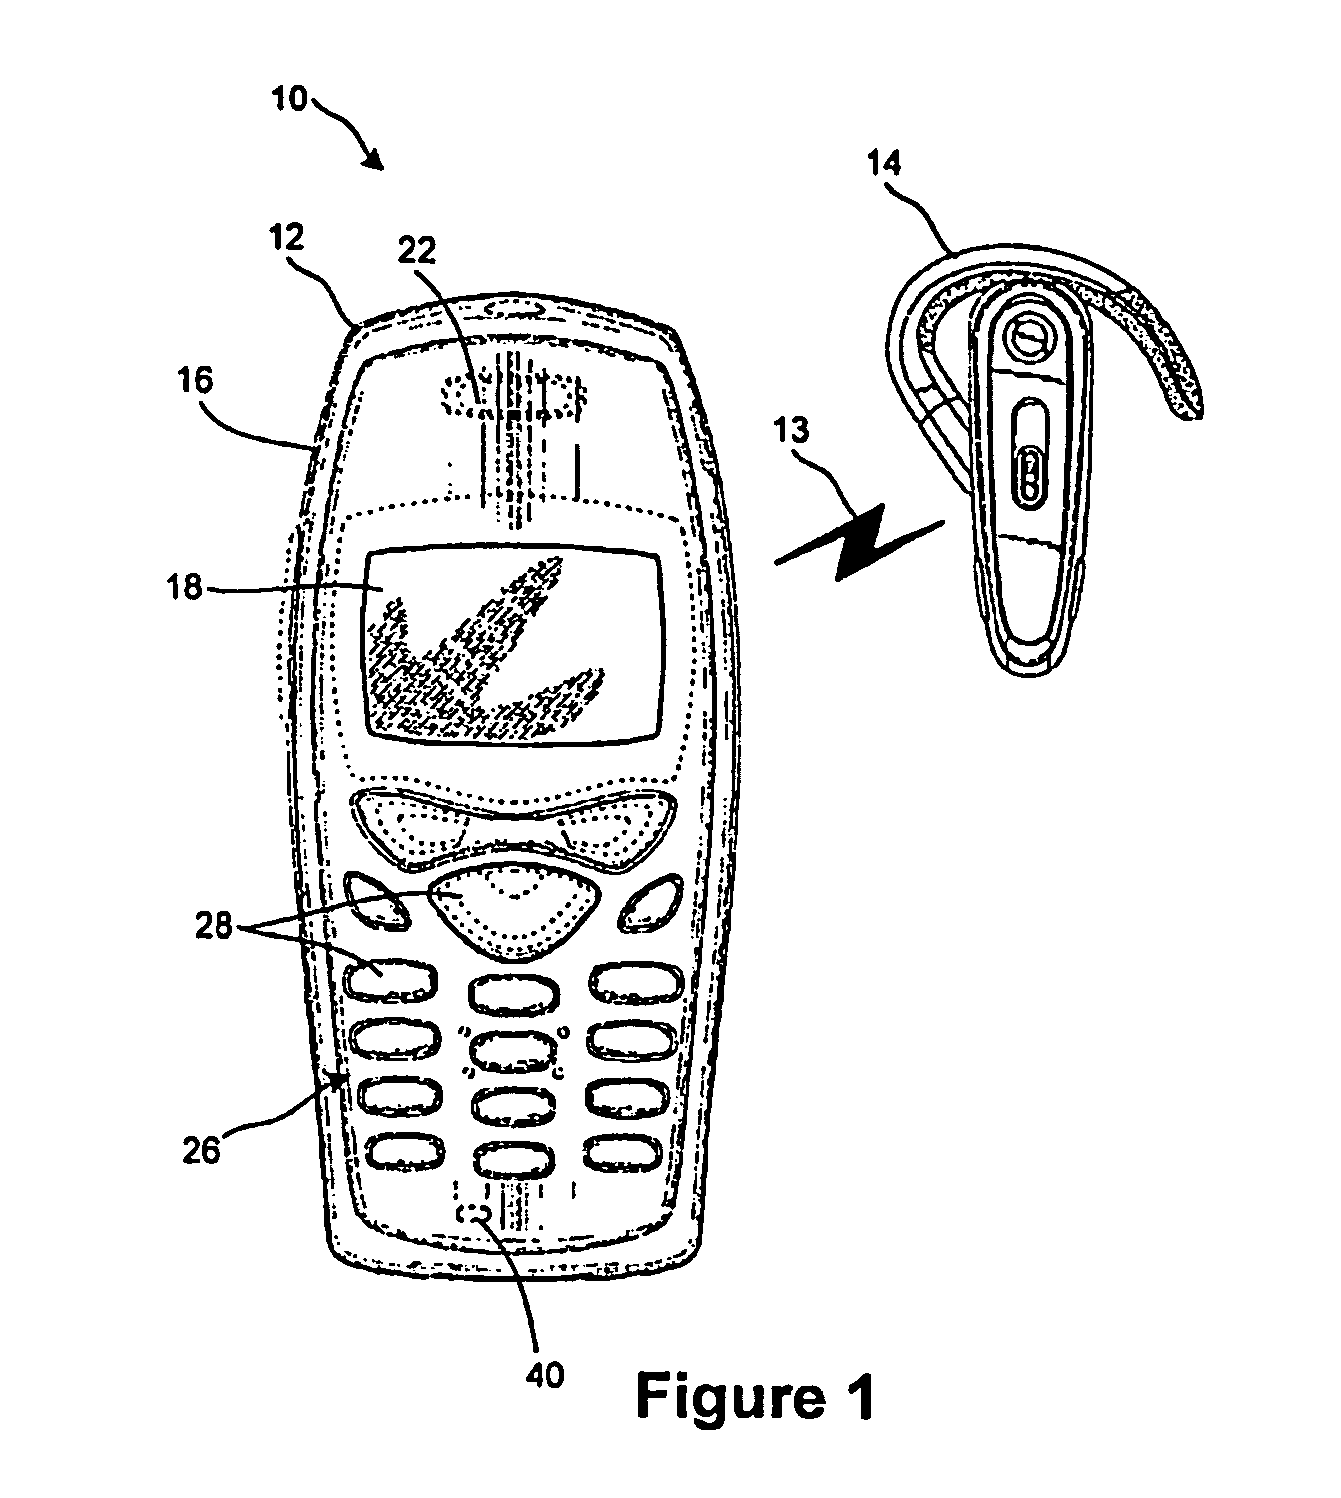 System and method for multimedia networking with mobile telephone and headset